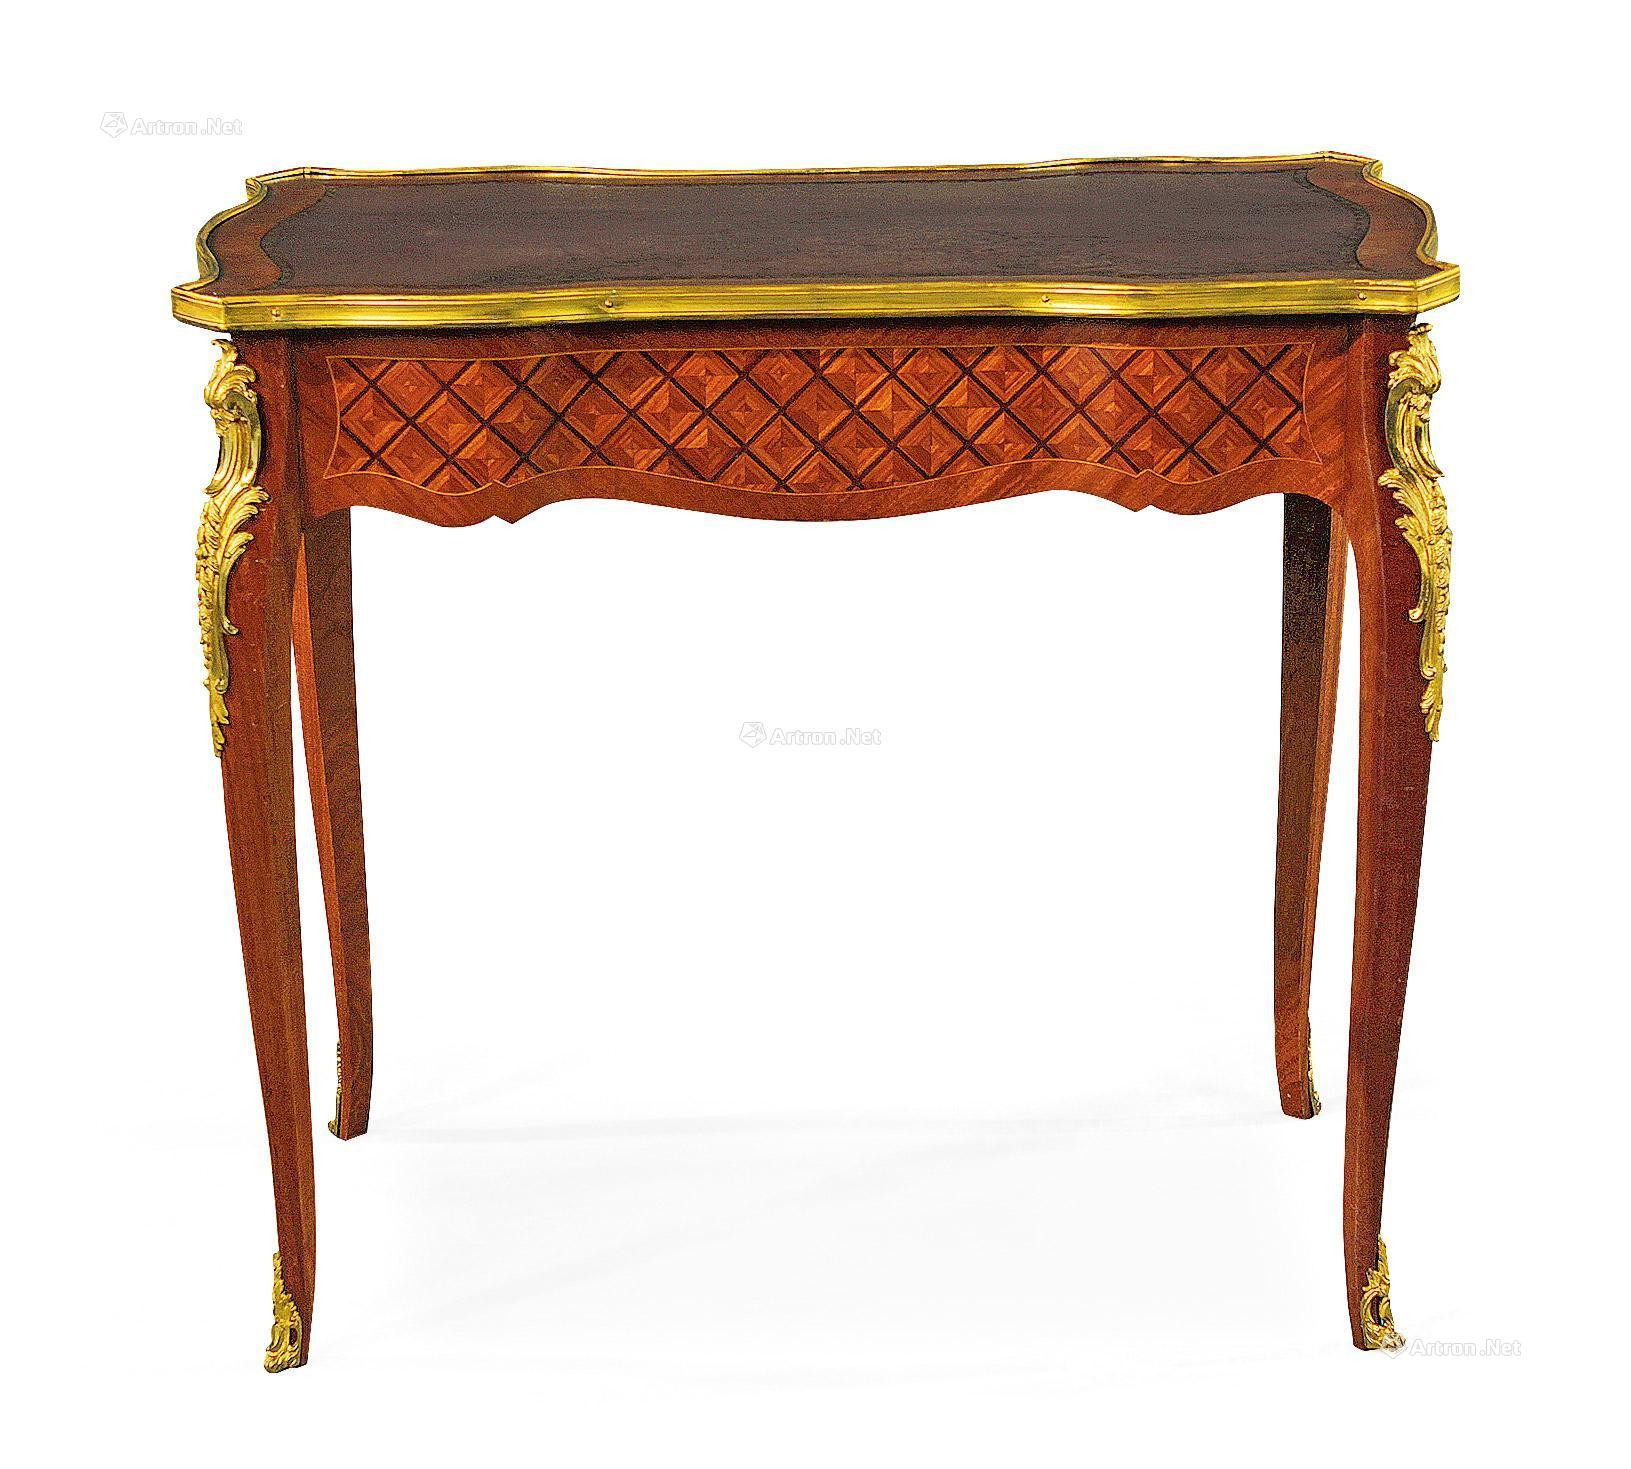 A FRENCH LOUIS XV STYLE MARQUETRY WRITING DESK